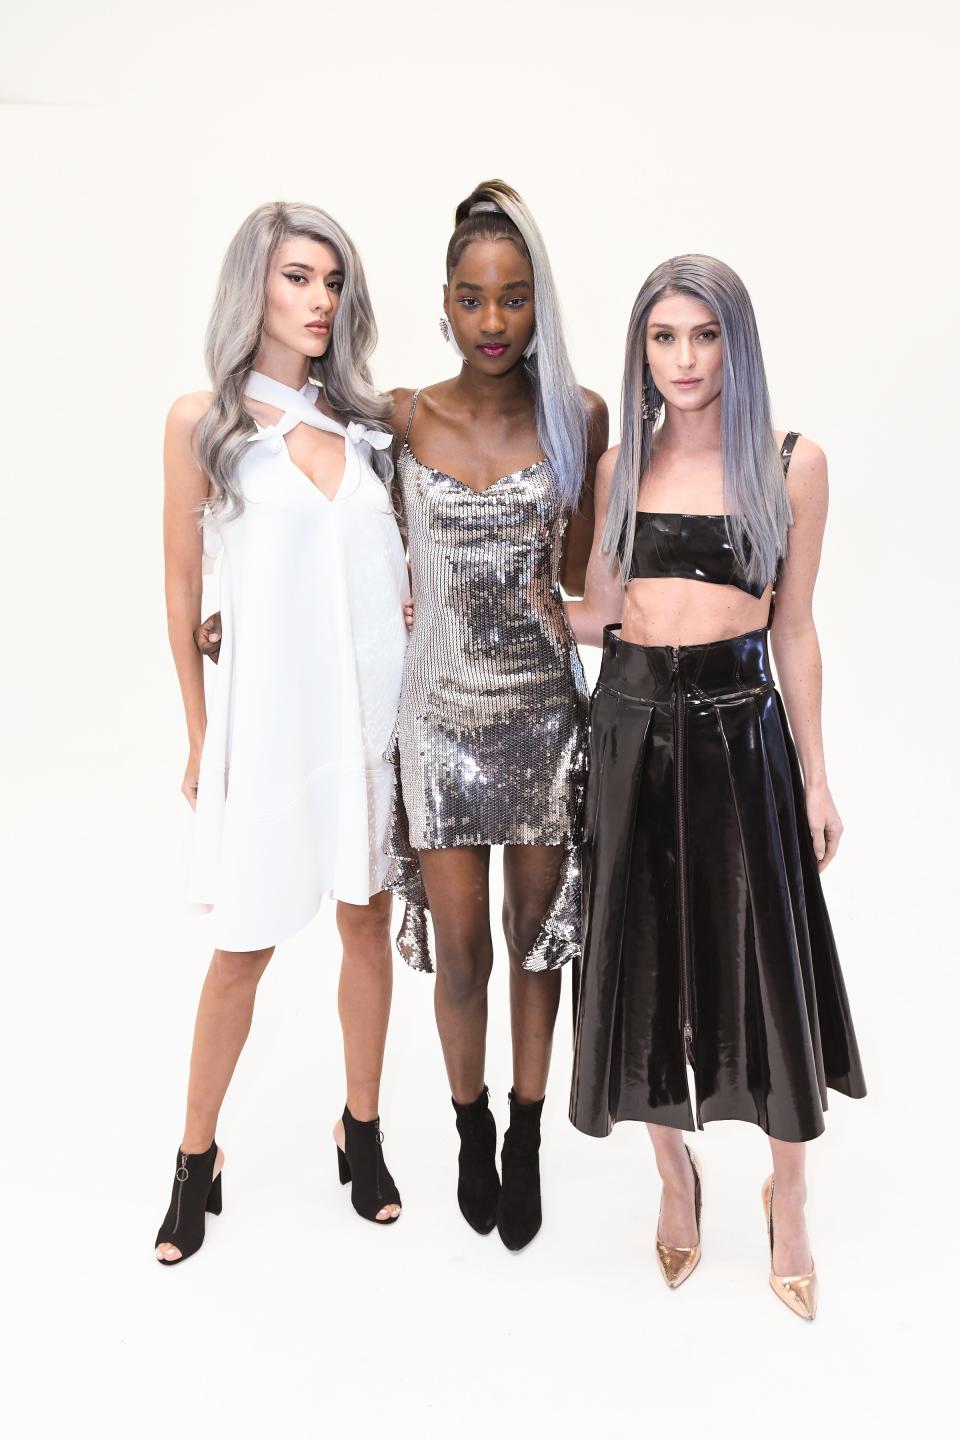 With New York Fashion Week in full swing and an impending blizzard about to hit the city, L’Oreal Paris and Vogue honored the color silver, L’Oreal Paris' #HairColoroftheYear.